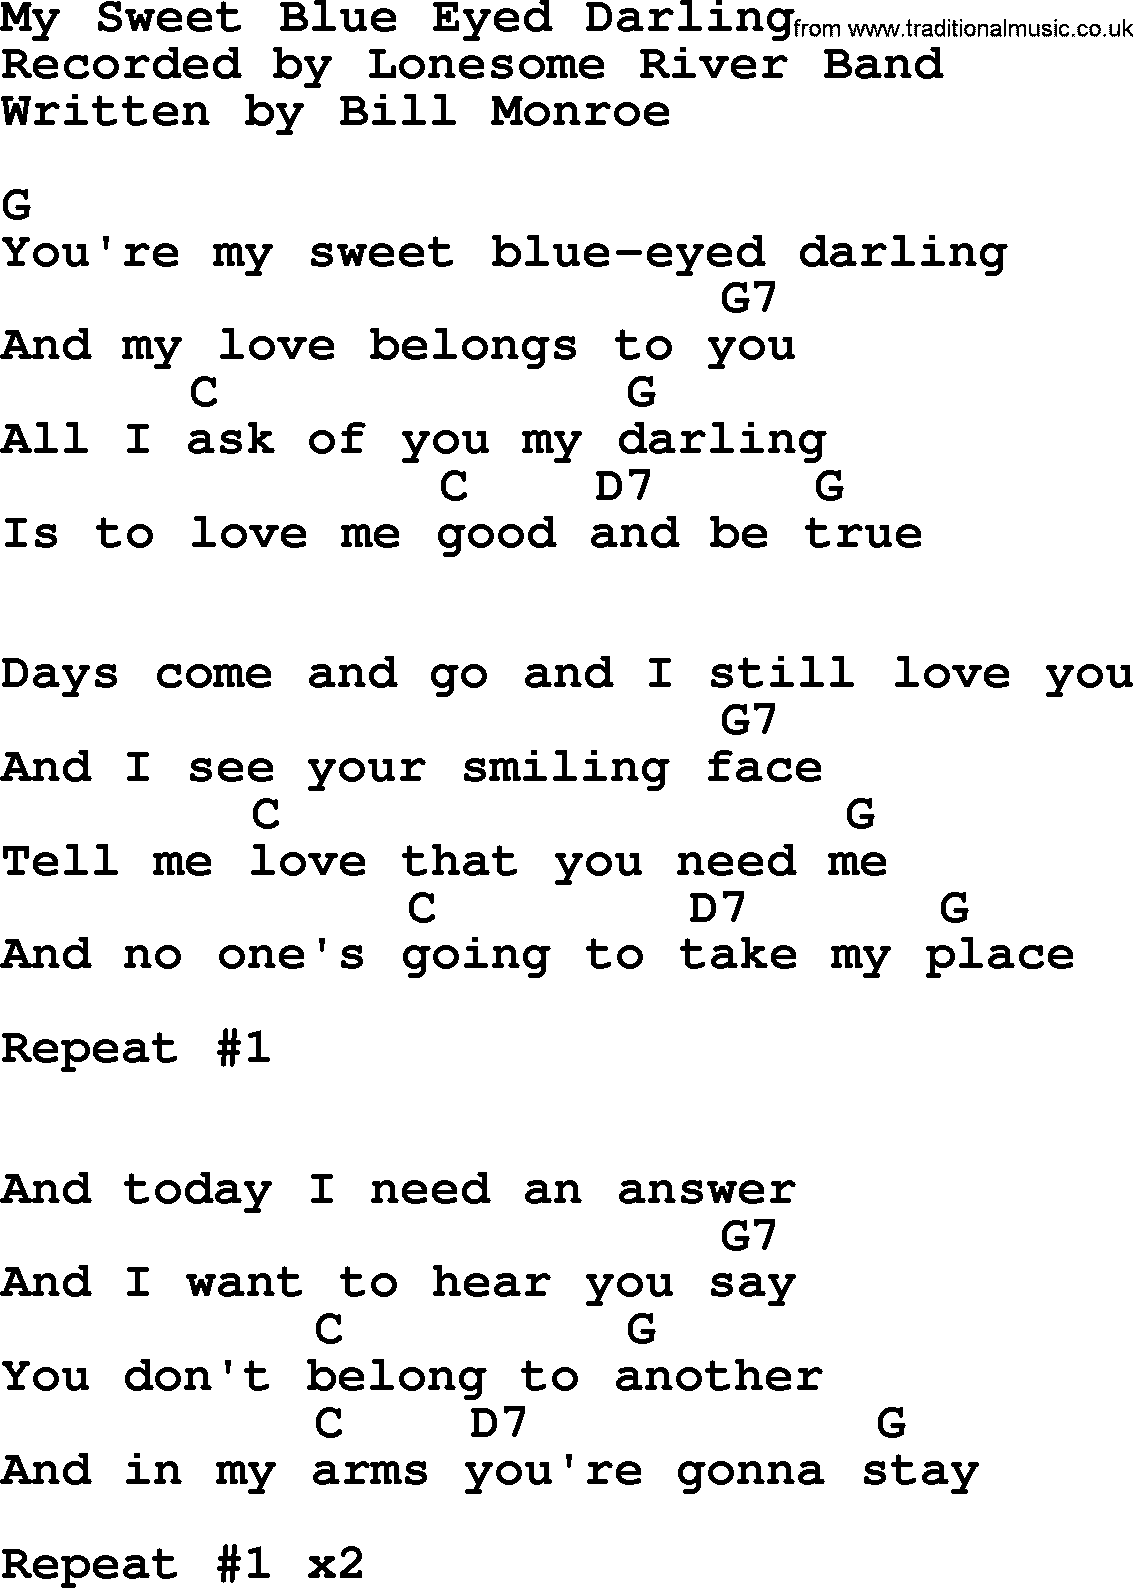 Bluegrass song: My Sweet Blue Eyed Darling, lyrics and chords